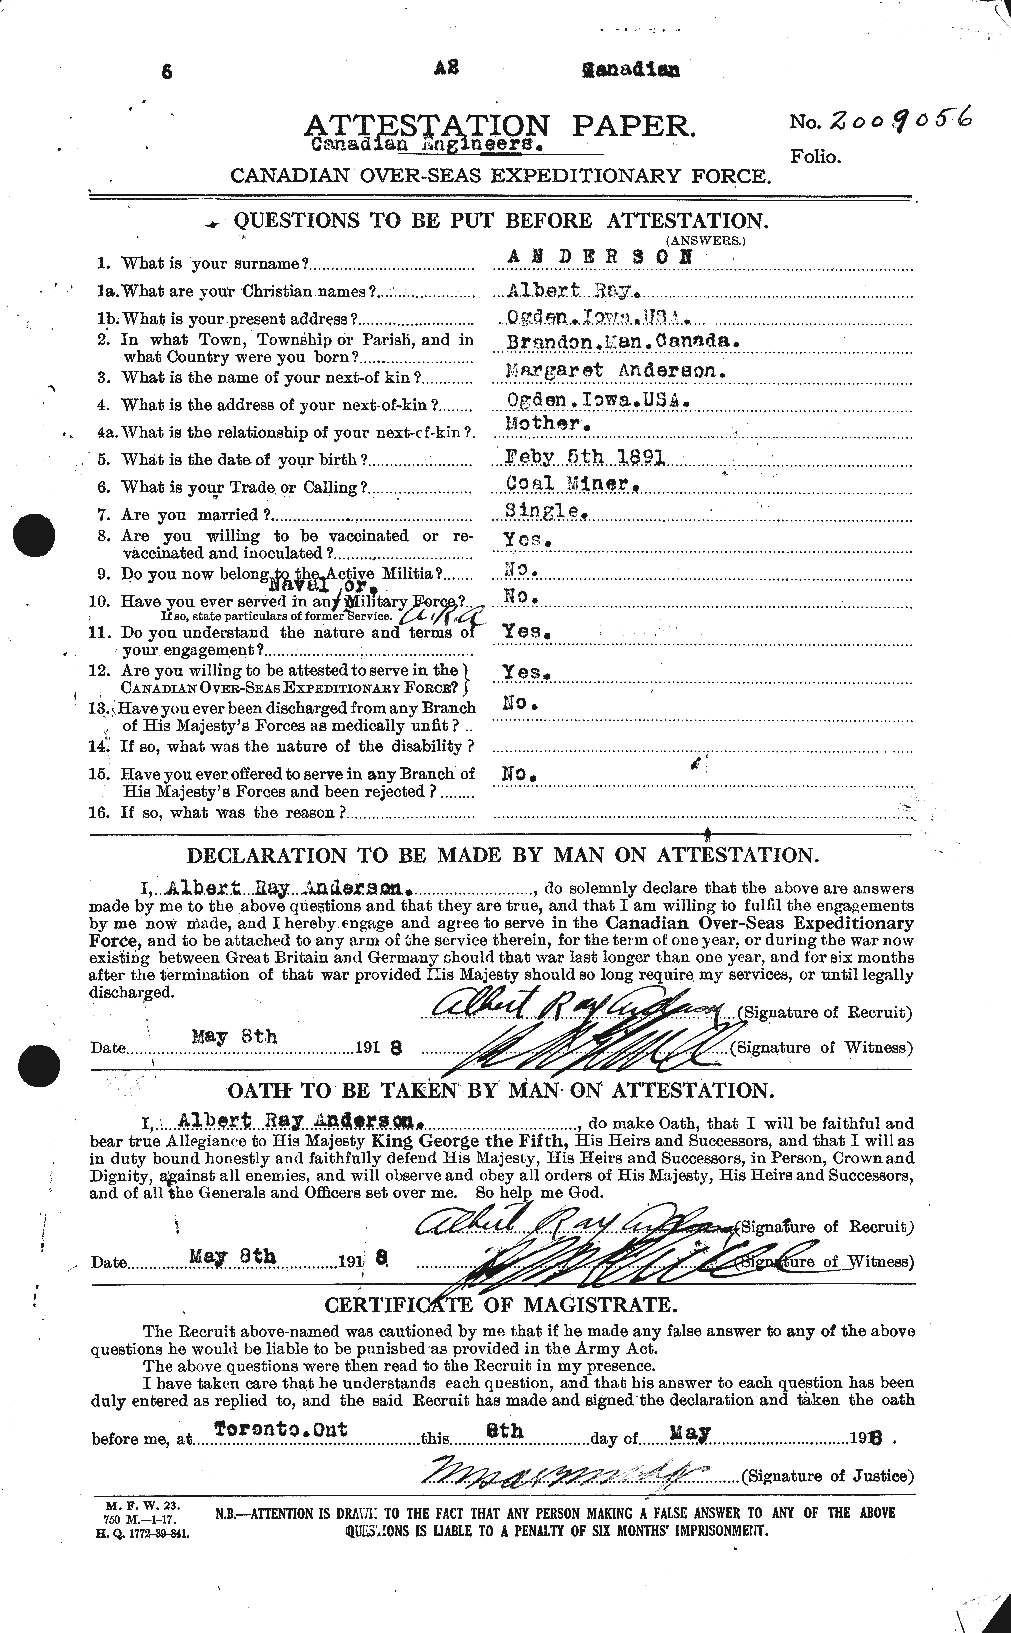 Personnel Records of the First World War - CEF 209537a